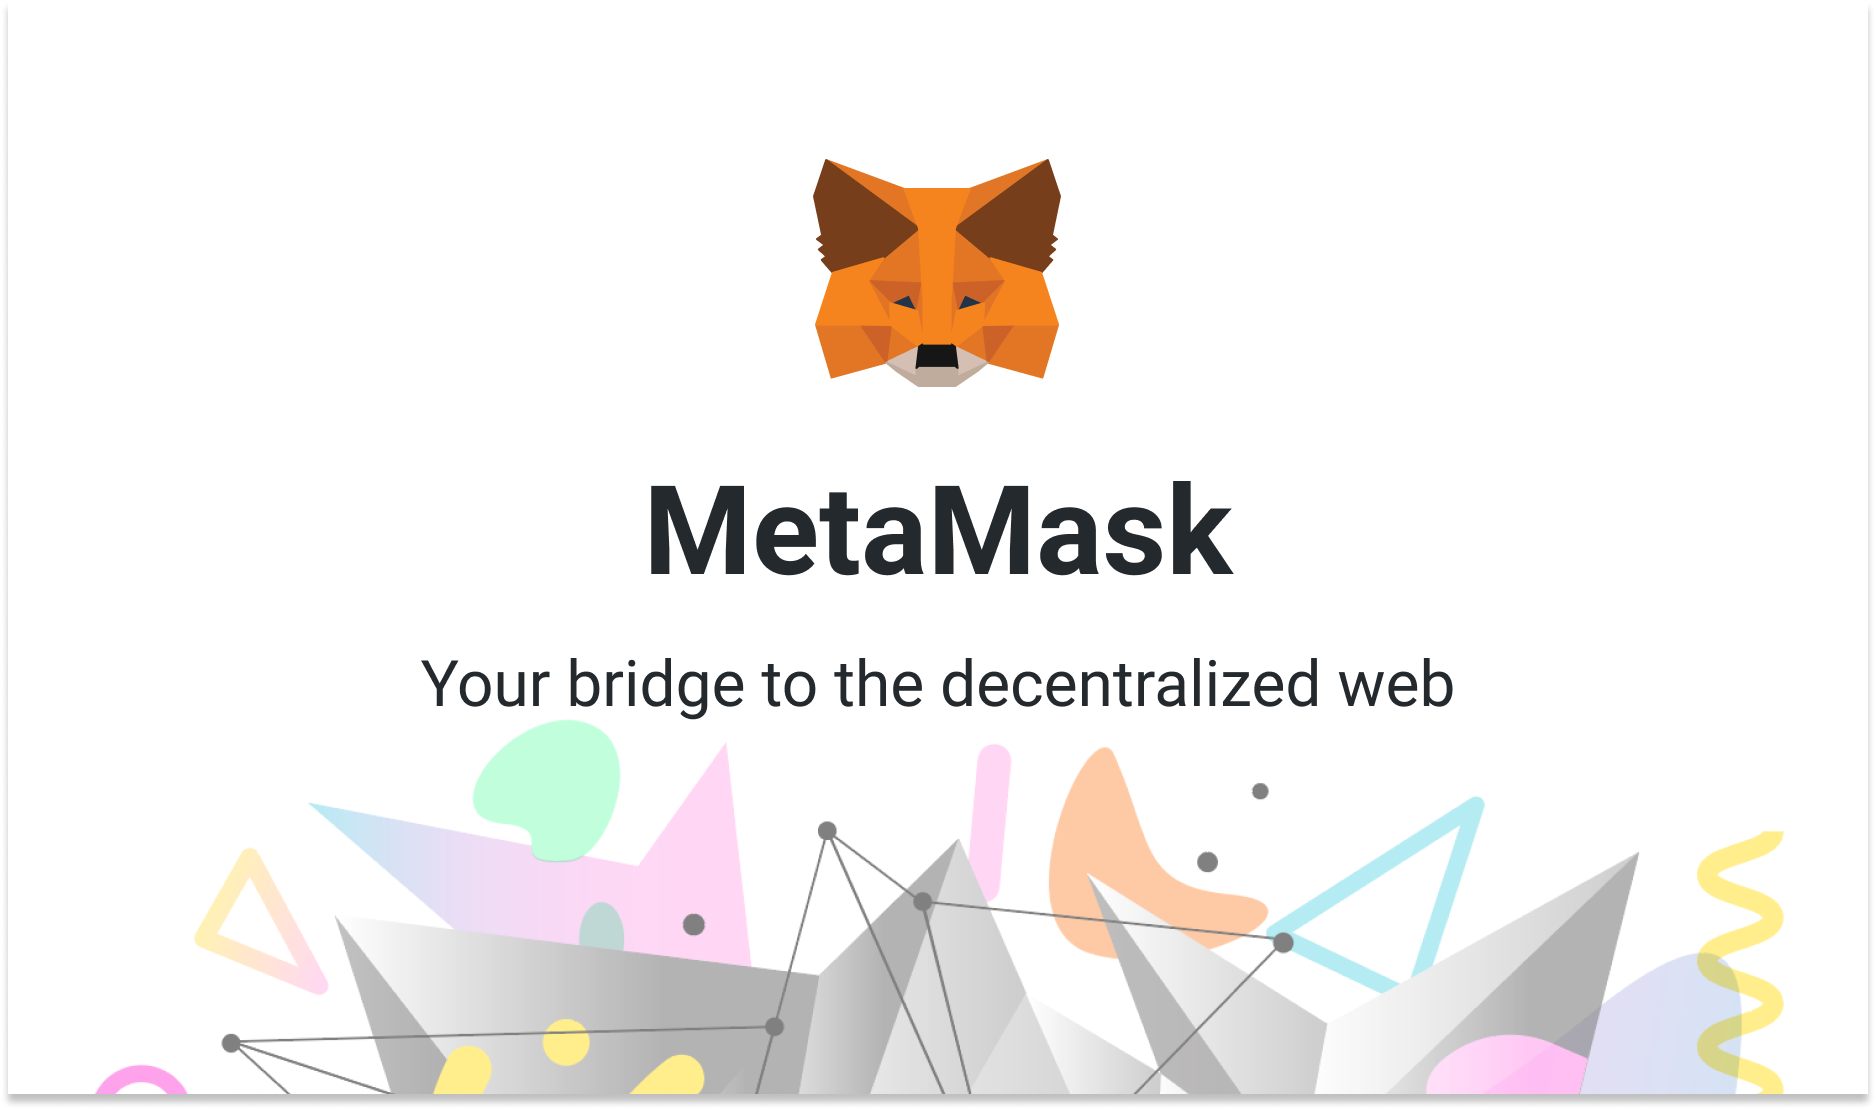 How To Use MetaMask To Take The First Step Into The World Of Decentralized Finance